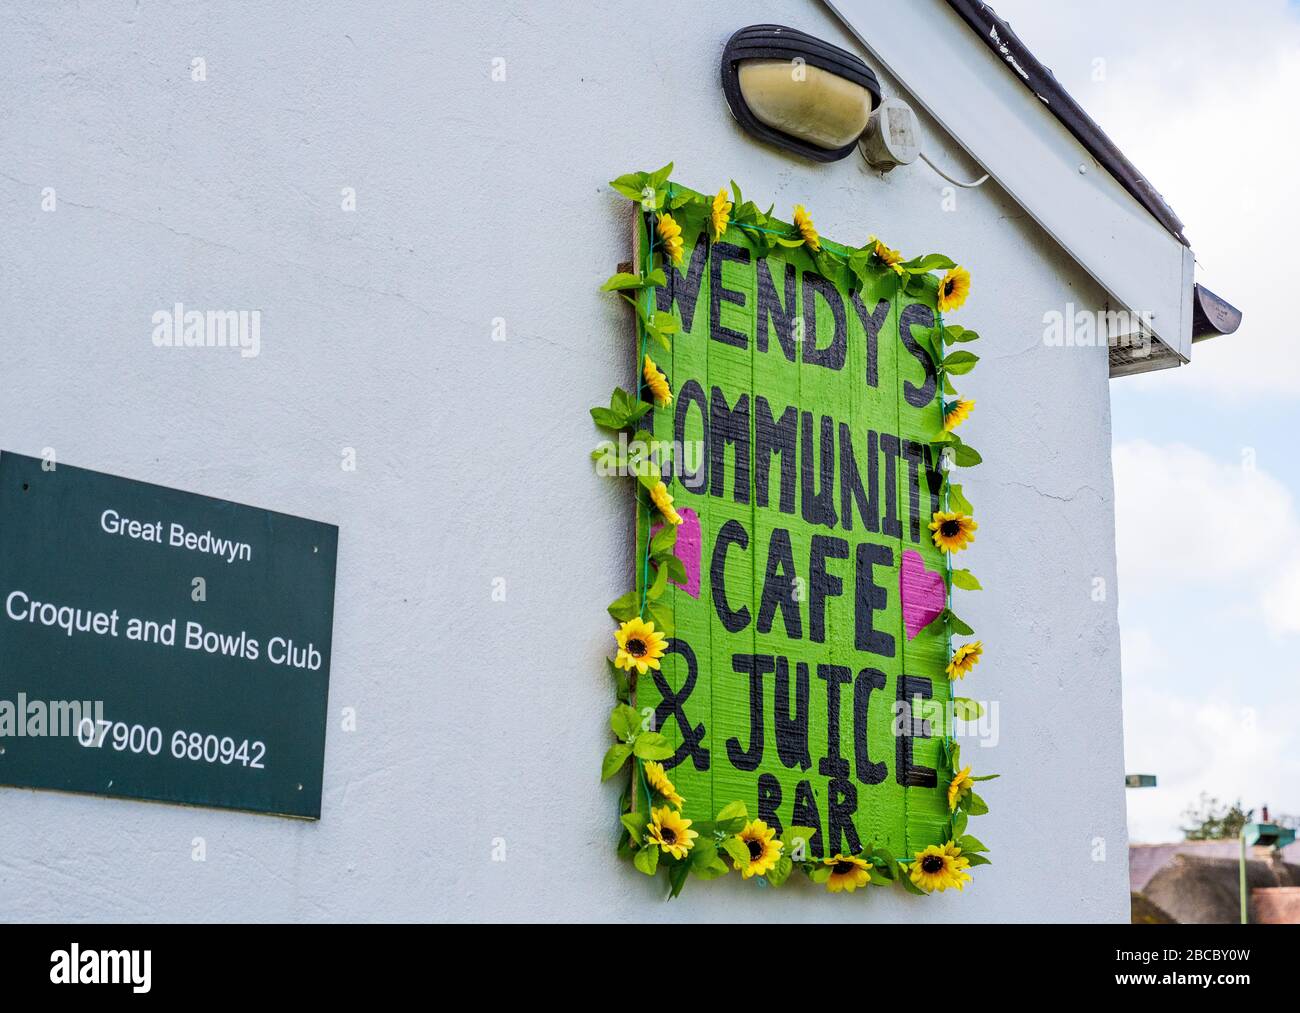 Wendy's Community Cafe & Juice Bar, Great Bedwyn, North Wessex Downs, Wiltshire, England, UK, GB. Stock Photo